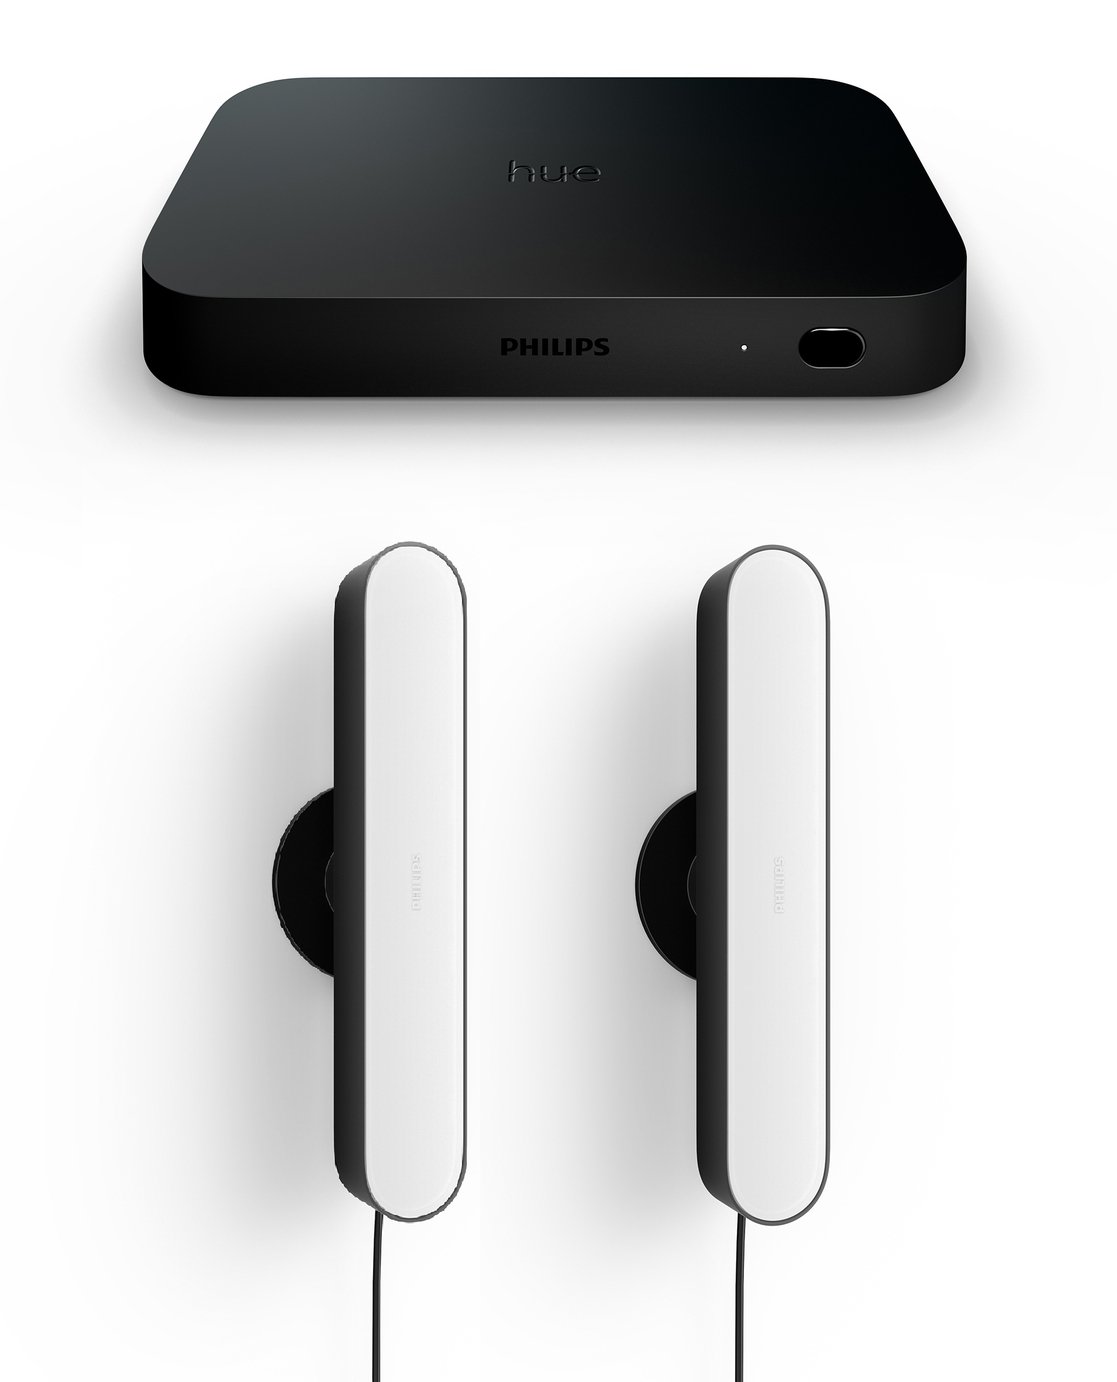 Philips Indoor Hue HDMI Sync Box & Play Light Bar Twin Pack